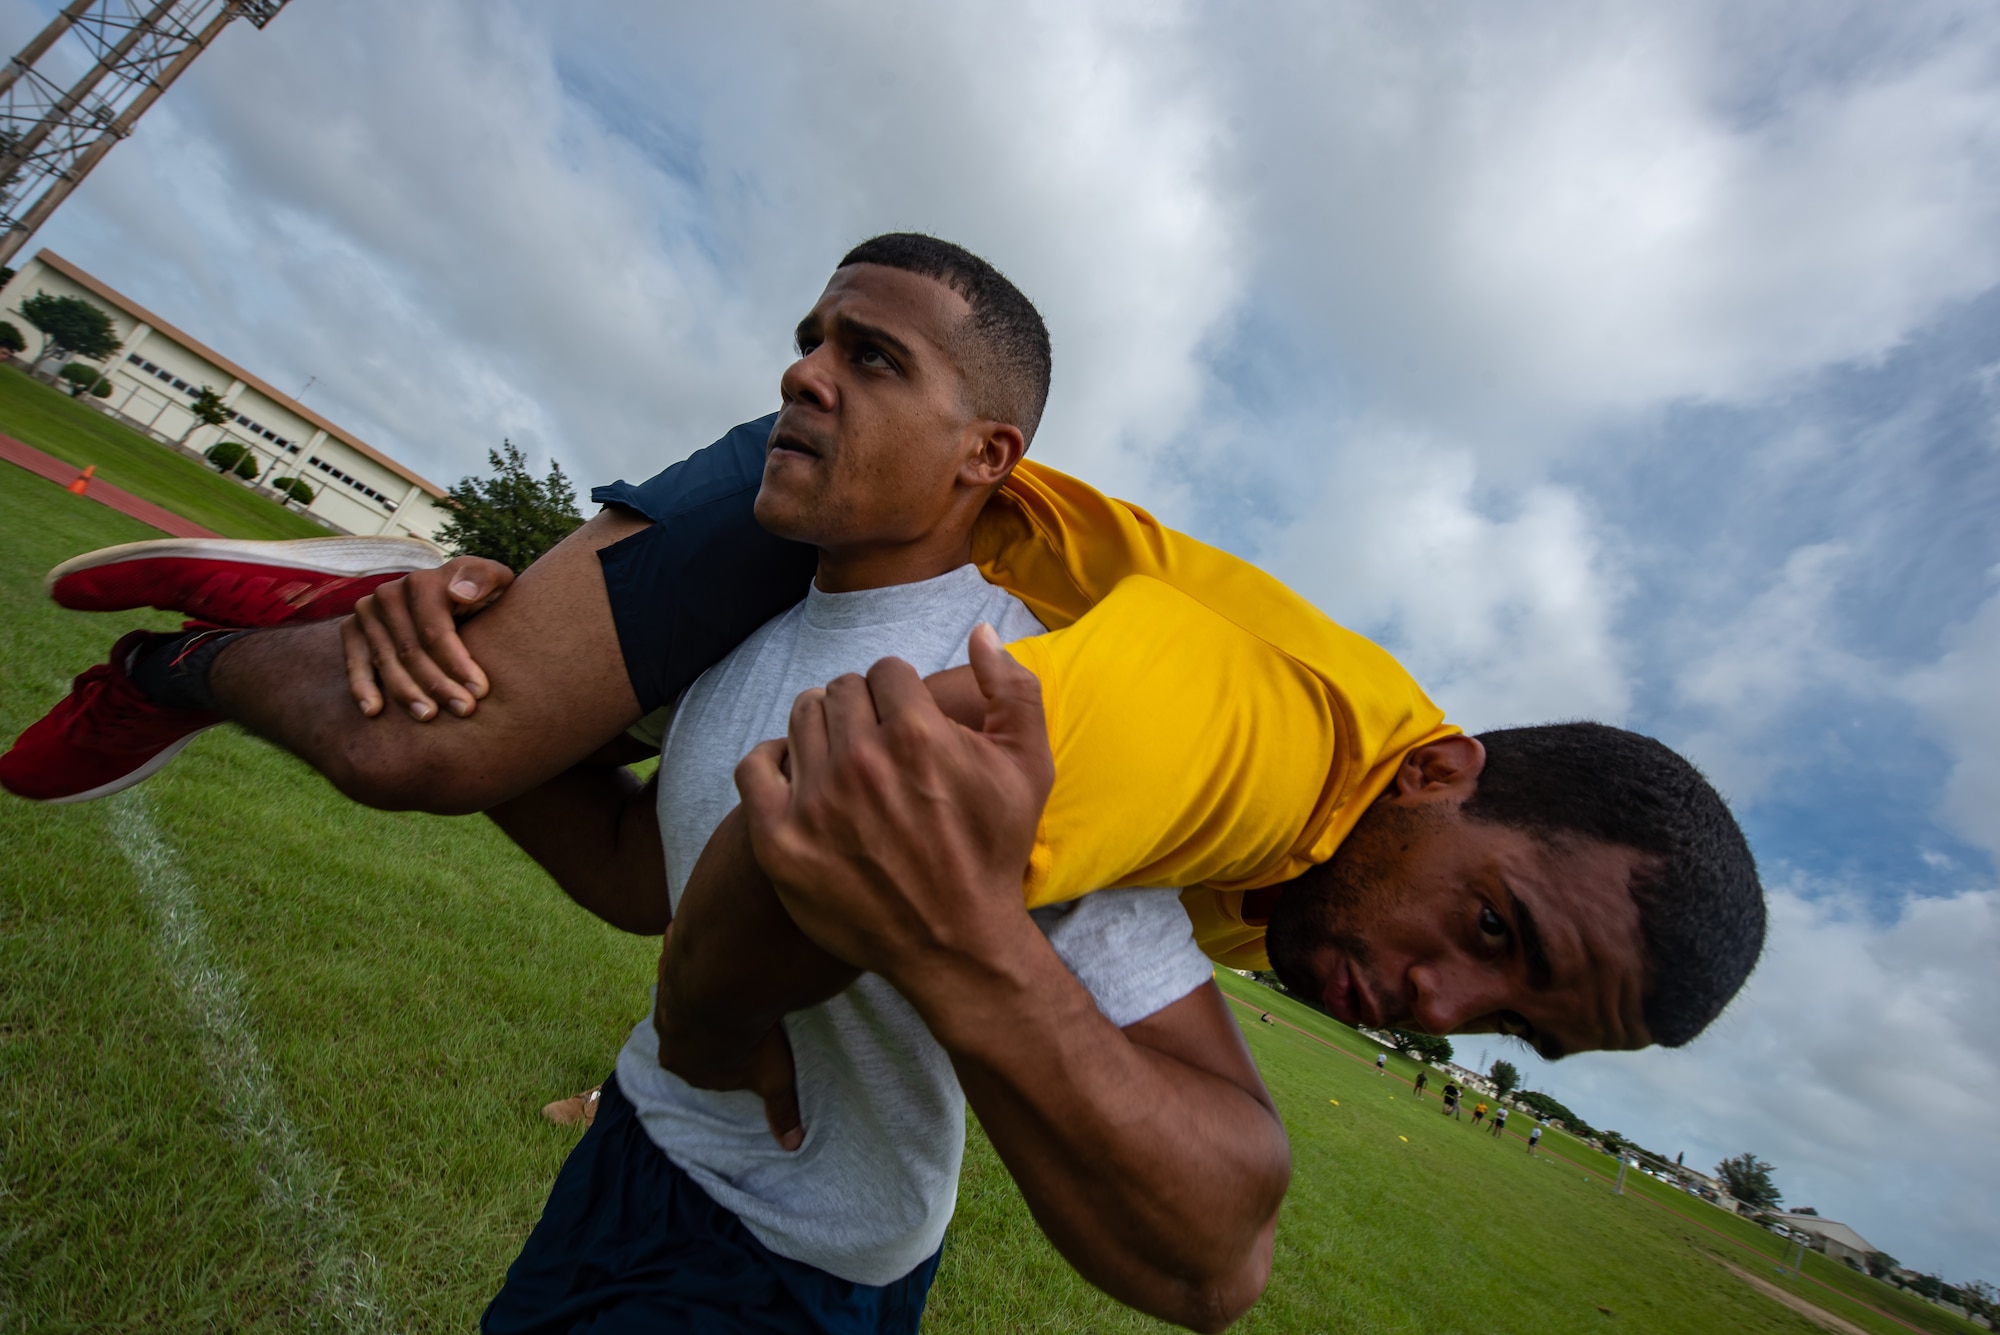 U.S. Air Force Staff Sgt. Thomas Nollie carries U.S. Navy Petty Officer 2nd Class Jesse Pedrero, both Okinawa Joint Experience Green Team students, during the Okinawa Joint Fitness Challenge Sept. 26, 2018, at Kadena Air Base, Japan. The OJFC was designed to mimic obstacles and challenges faced in the battlefield such as sprinting, running ammunition cans, transporting wounded personnel to safety and tossing simulated grenades. Each team competed for the best time, however the final challenge brought all four teams together. (U.S. Air Force photo by Staff Sgt. Micaiah Anthony)